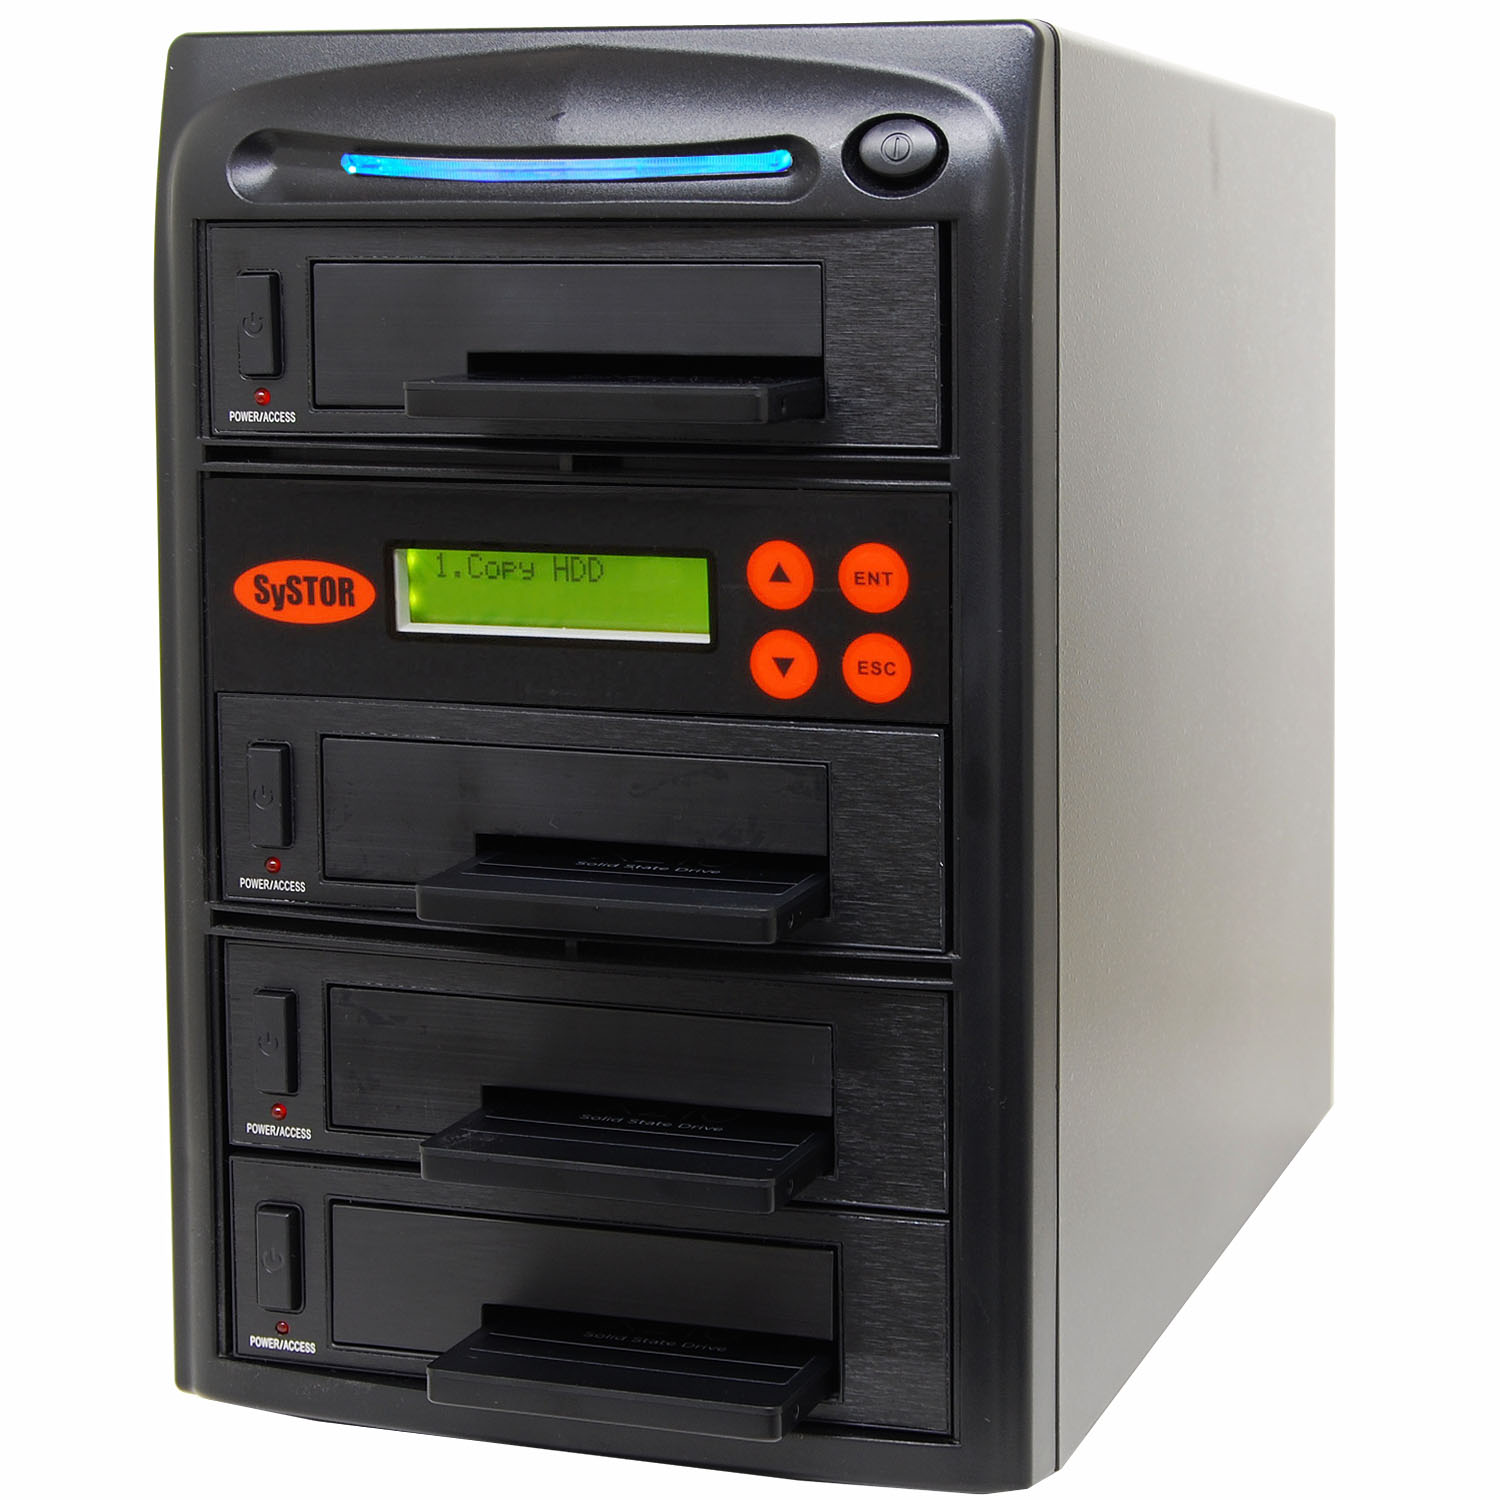 3 Hard Drive/Solid State Drive (HDD/SSD) Duplicator